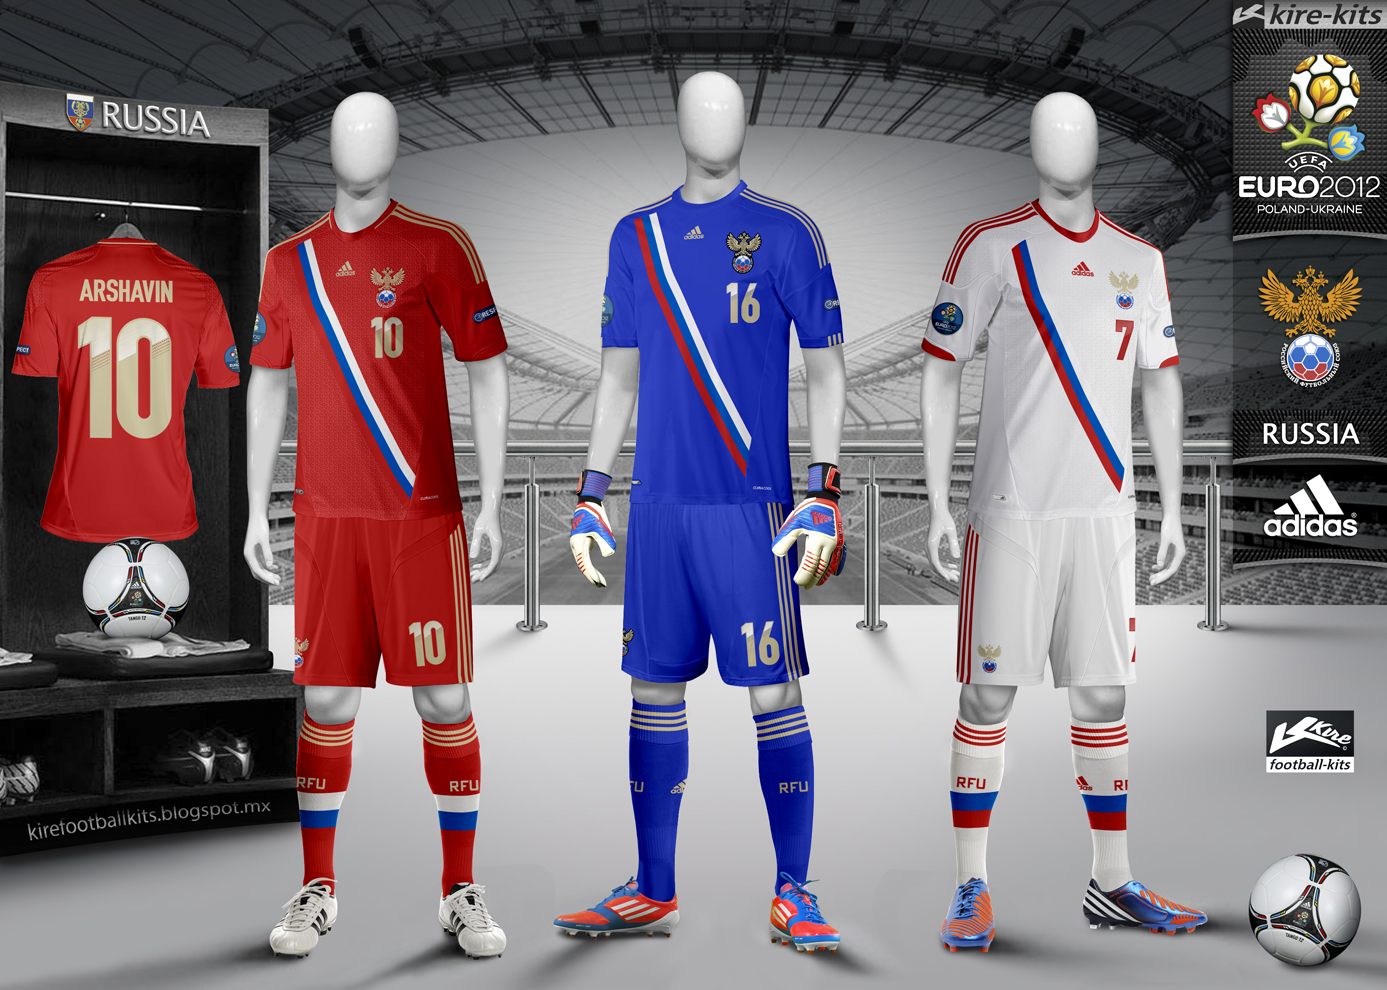 the traditional red and a strip with the russian flag not bad at all    football russia blogspot